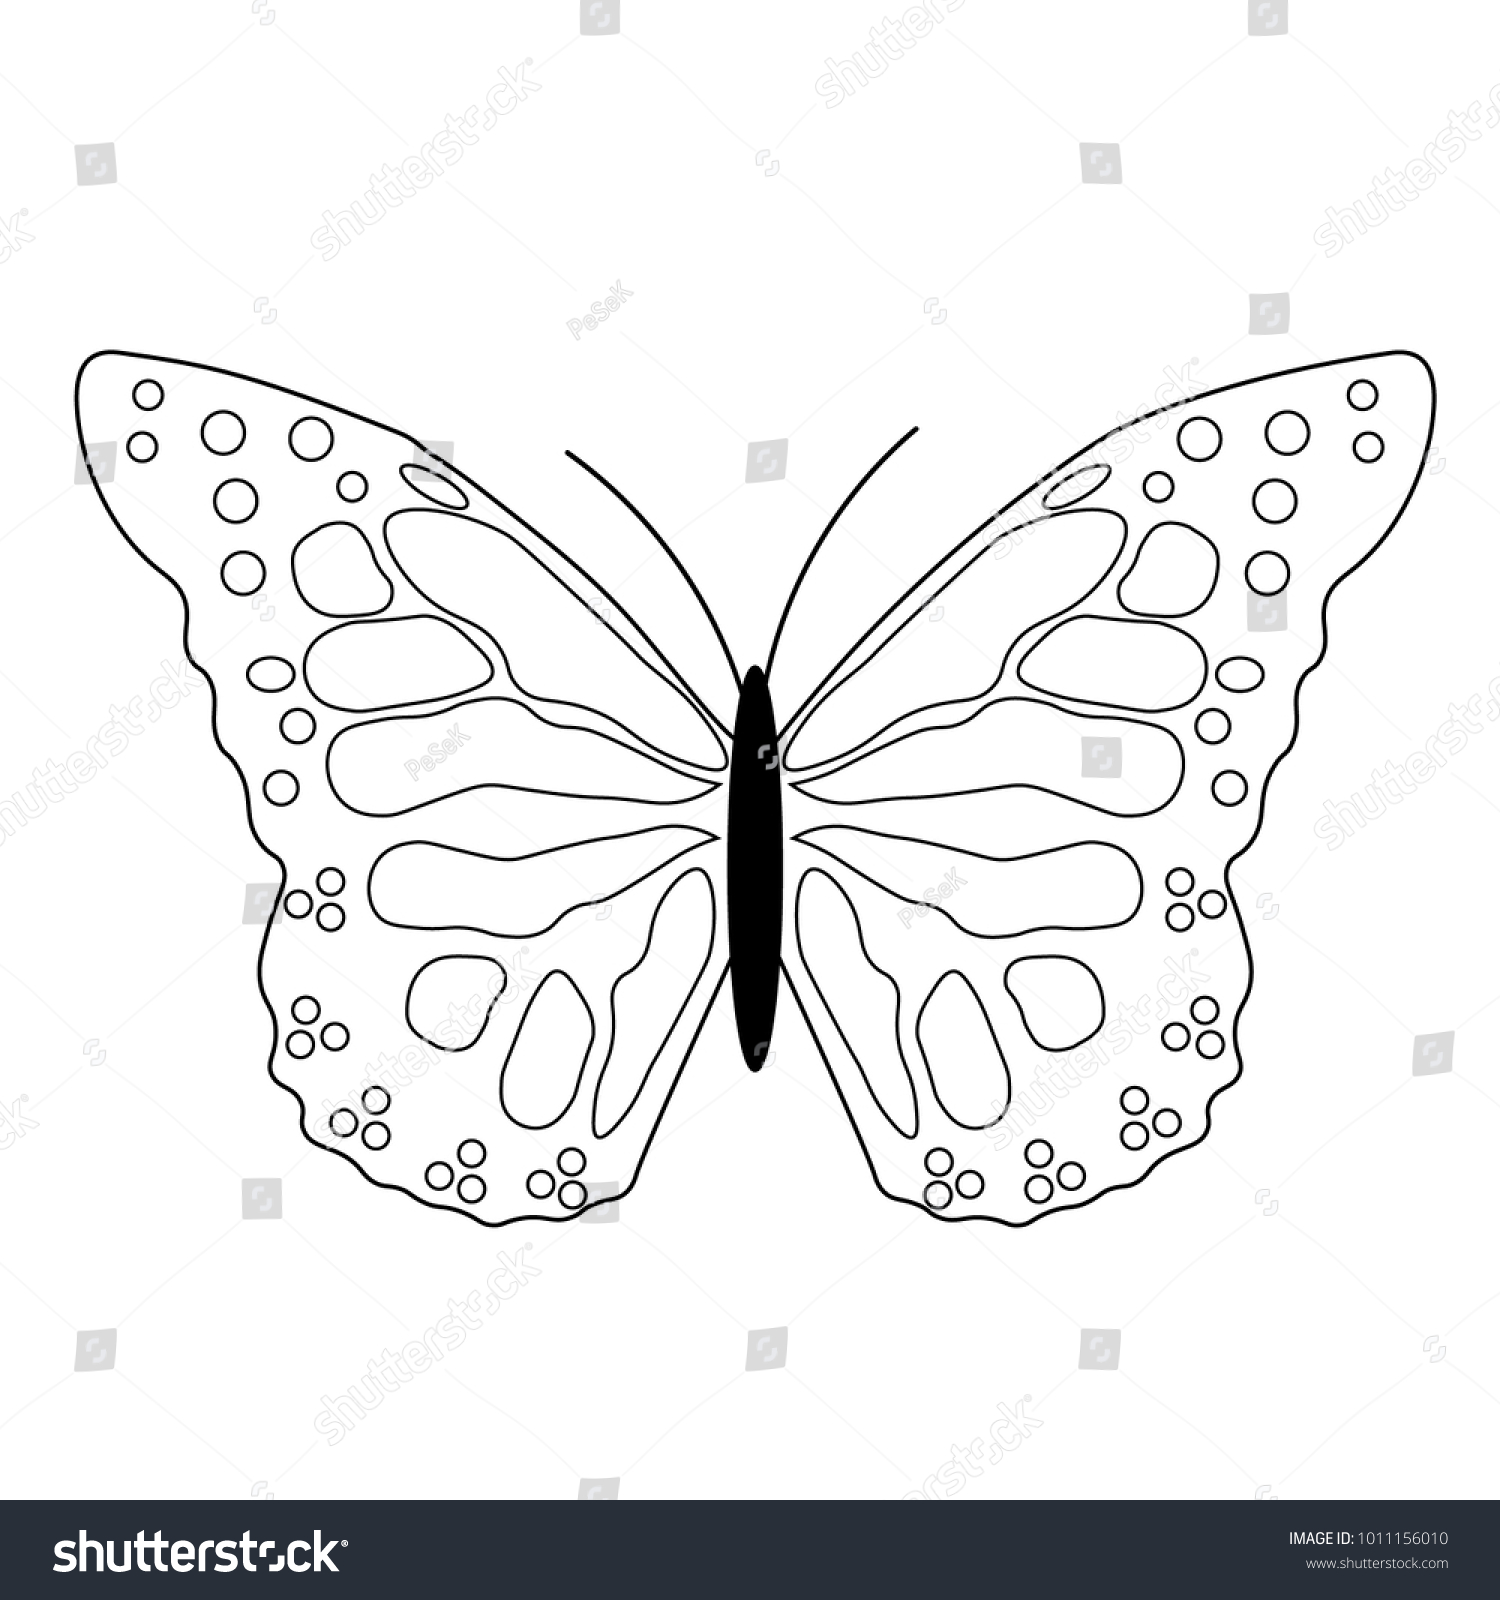 Download Coloring Book Butterfly Stock Vector Royalty Free 1011156010